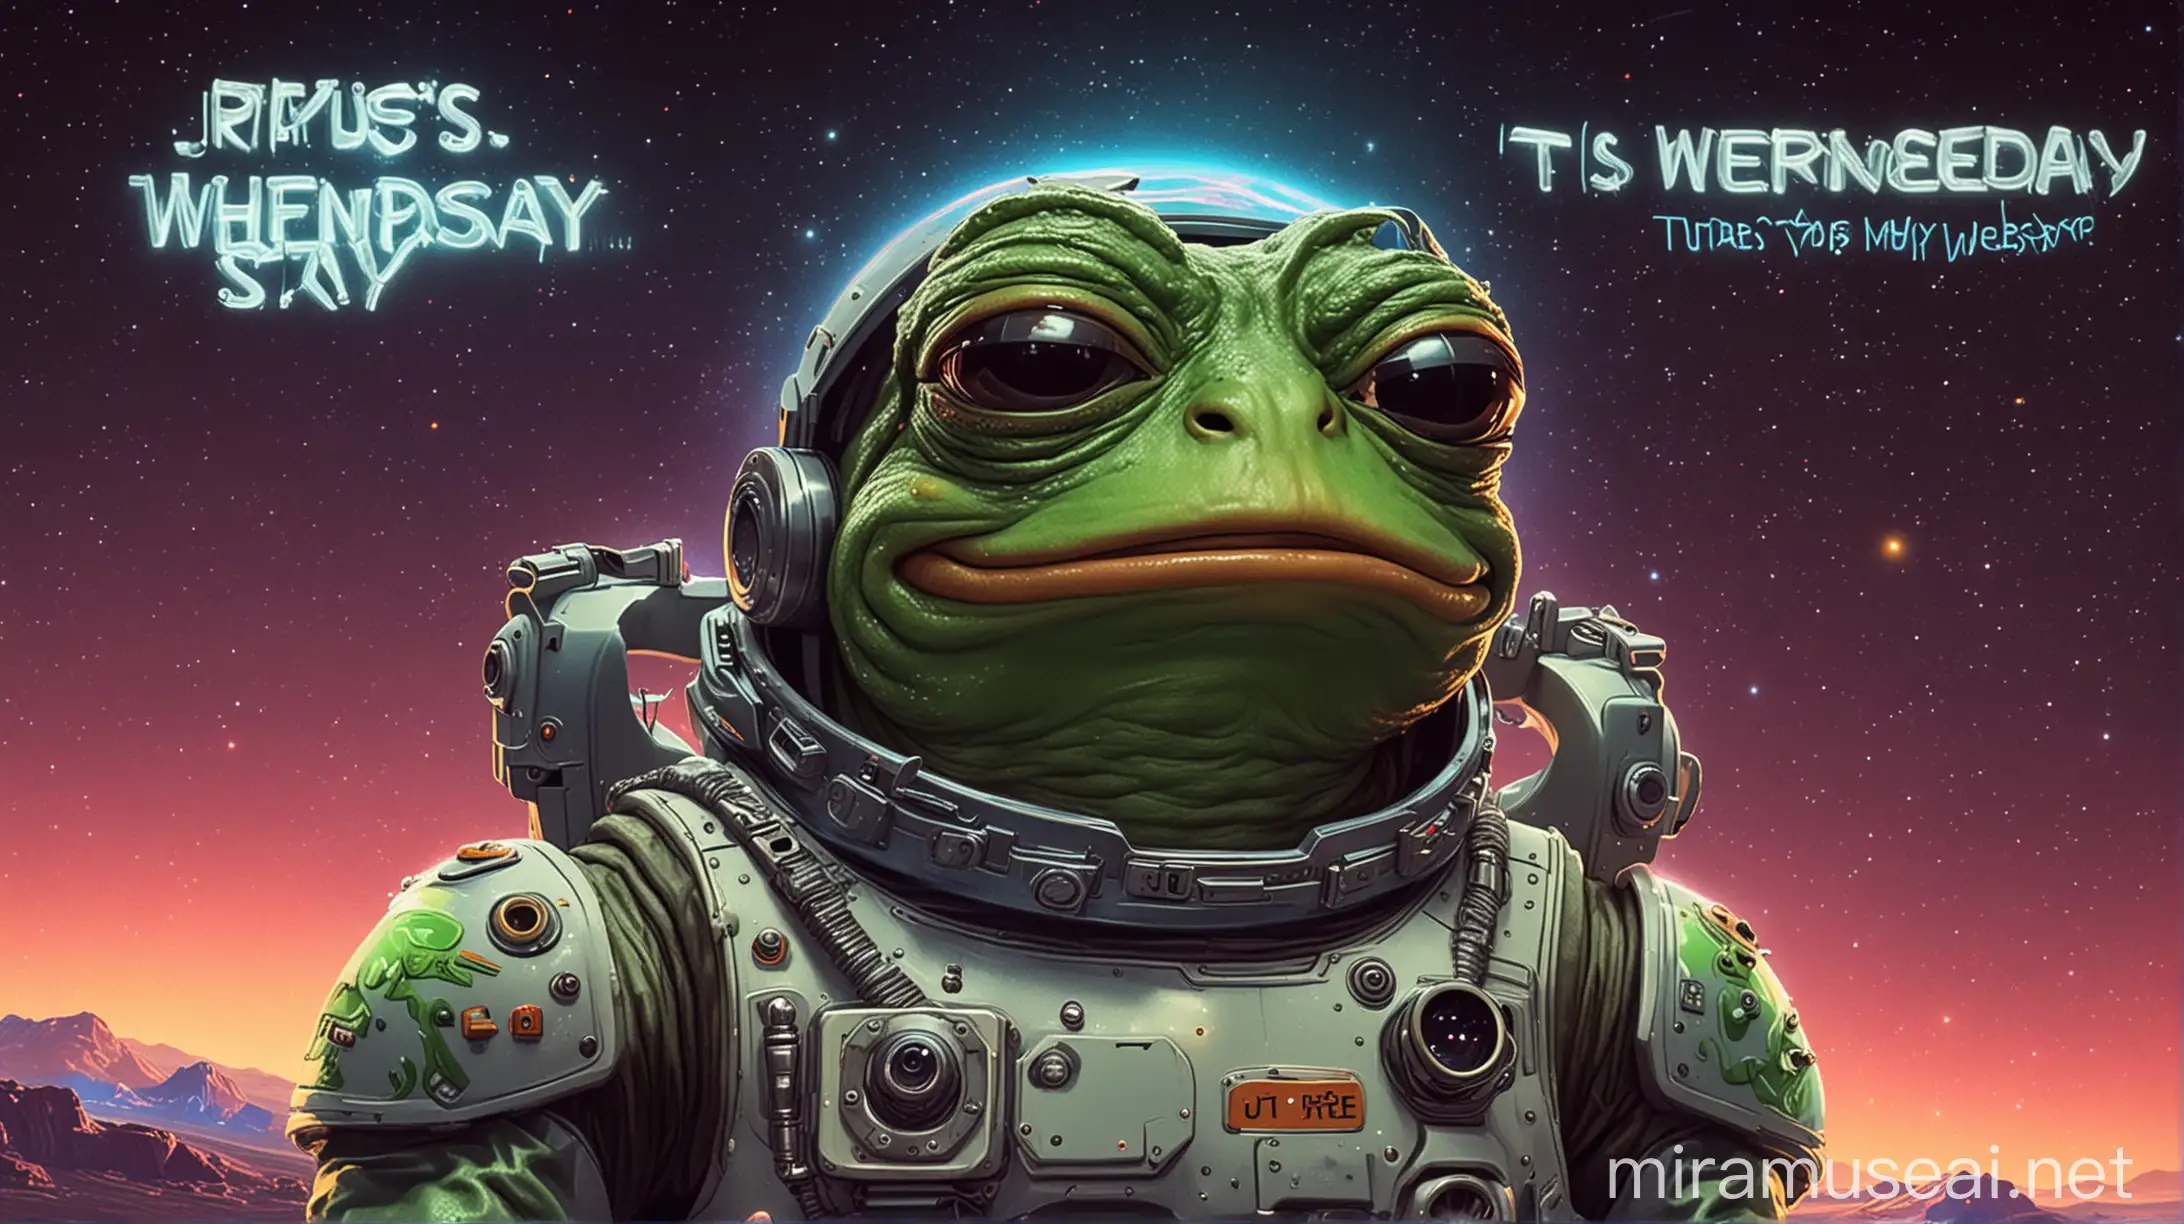 cartoon style, pepe frog from meme, heavily armored spacesuit, colorful neon glowing spacesuit, text "it is wednesday, my dudes", night sky